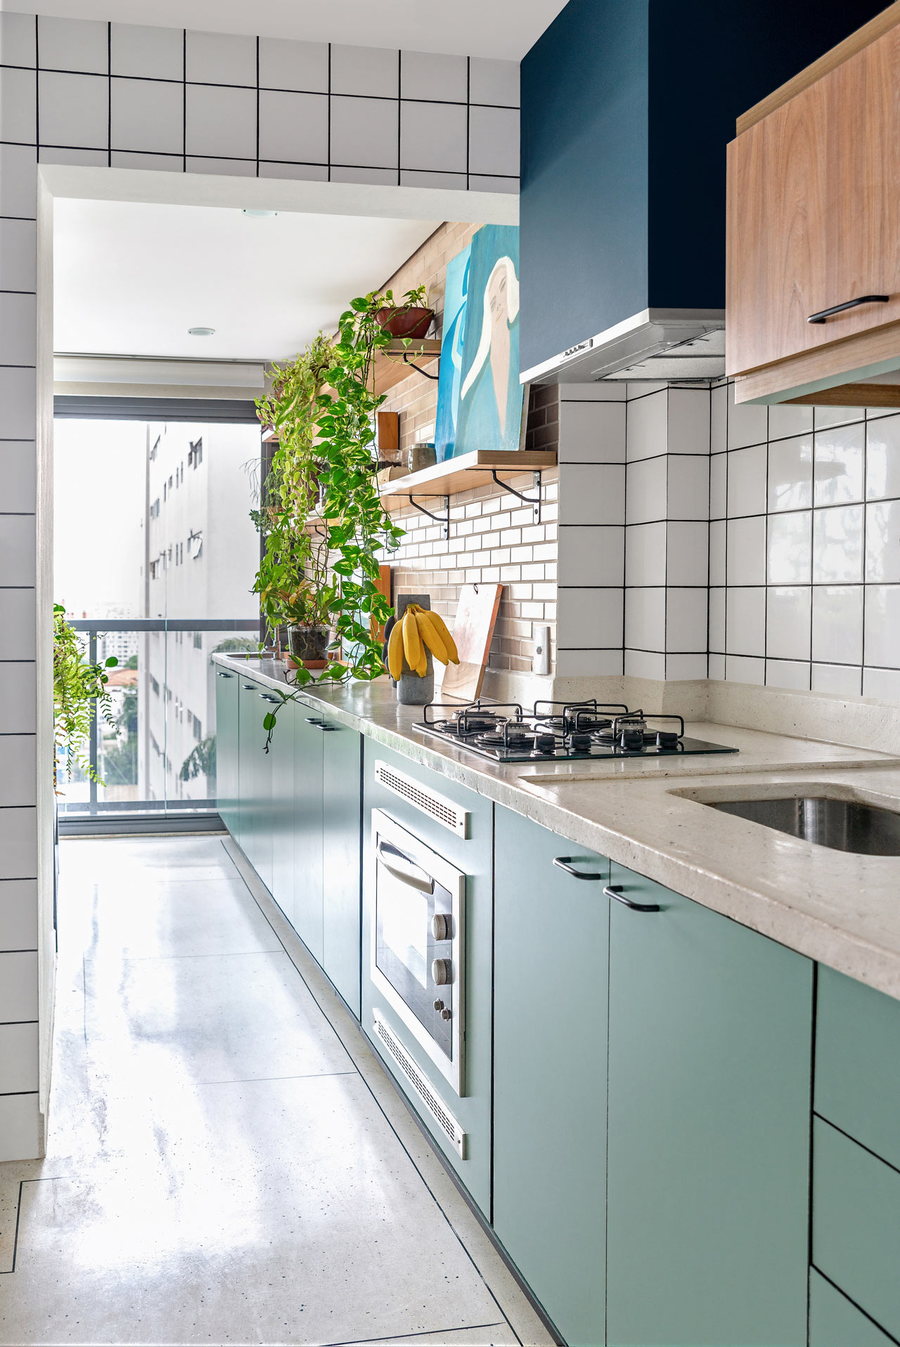 Long kitchen space inside the FM House effortlessly blends greenery and contemporary design features with bold retro touches.